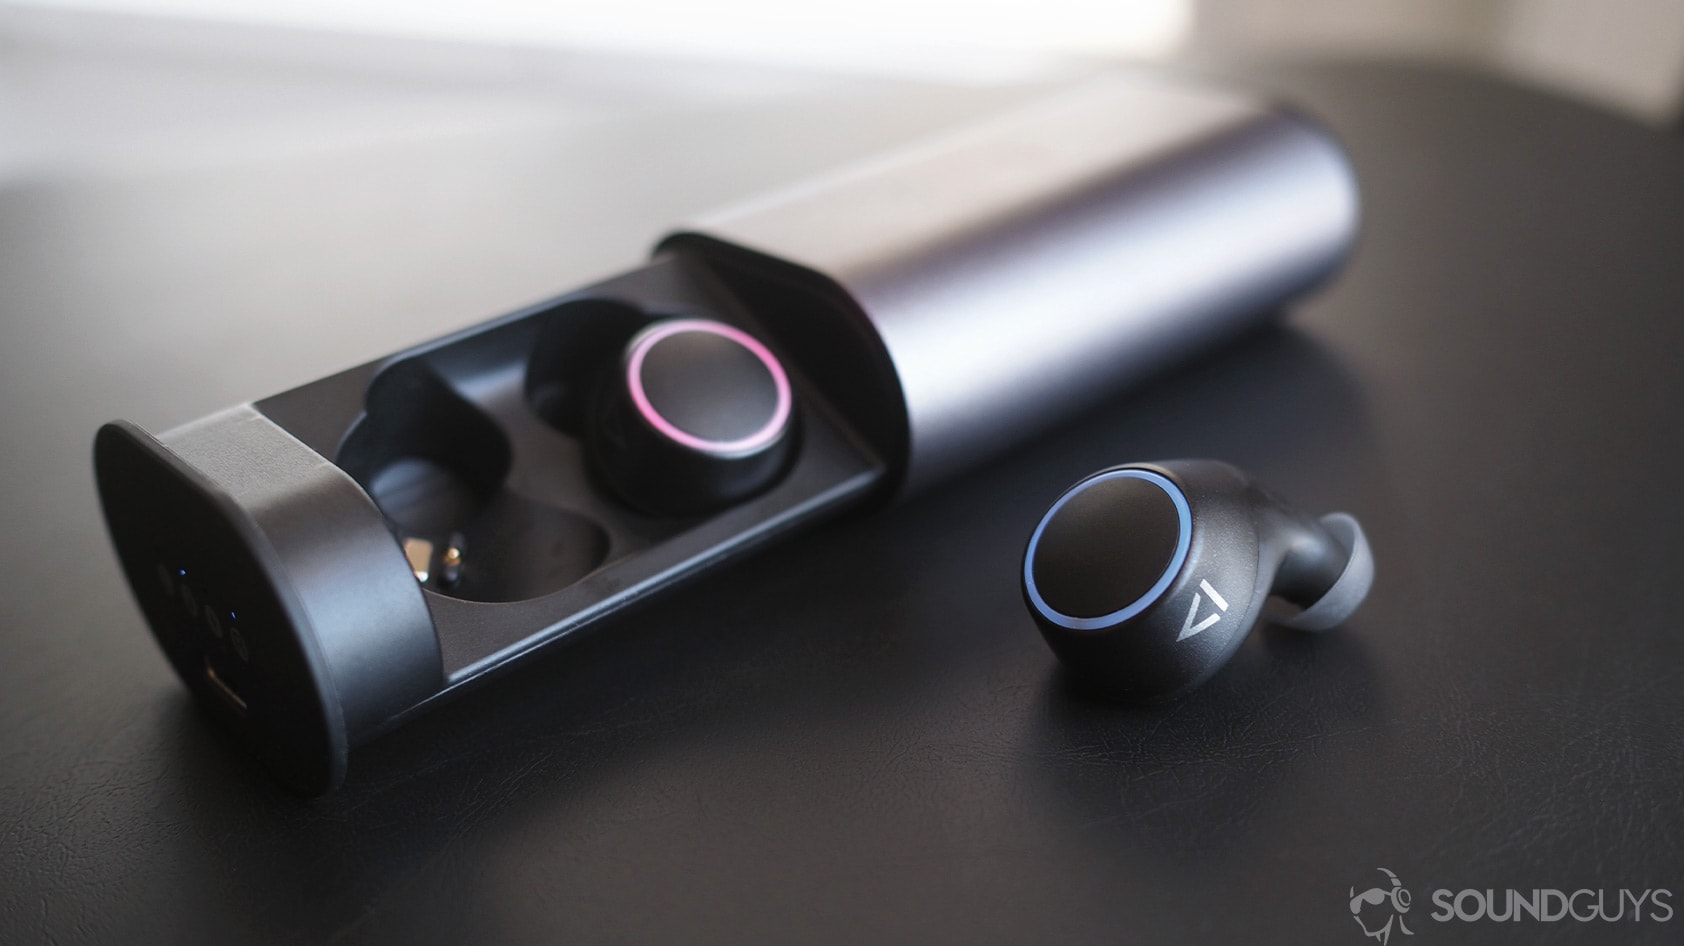 Creative Outlier Air true wireless earbuds with one in the case and the other resting just outside of it.